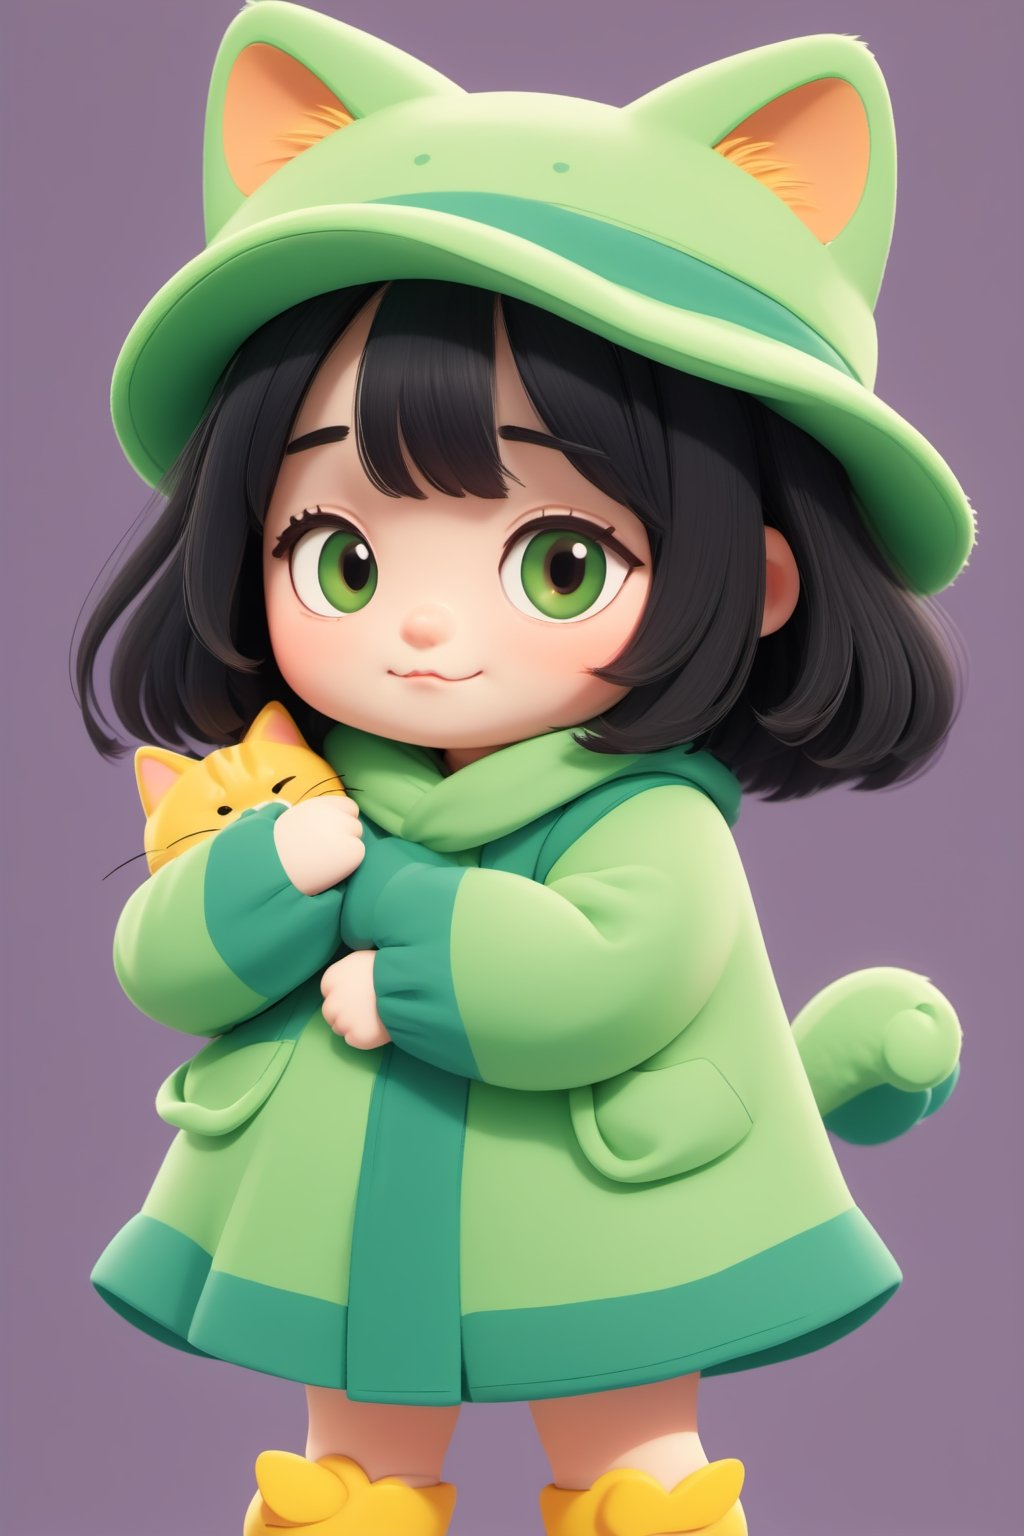 (( Riding a giant fat fluffy cat )), shining eyes, twin braid, black hair, parted bangs, little girl, 10 years old, simple green witch's big hat and green robe, ,LegendDarkFantasy,DonMB4nsh33XL ,chibi,cute comic